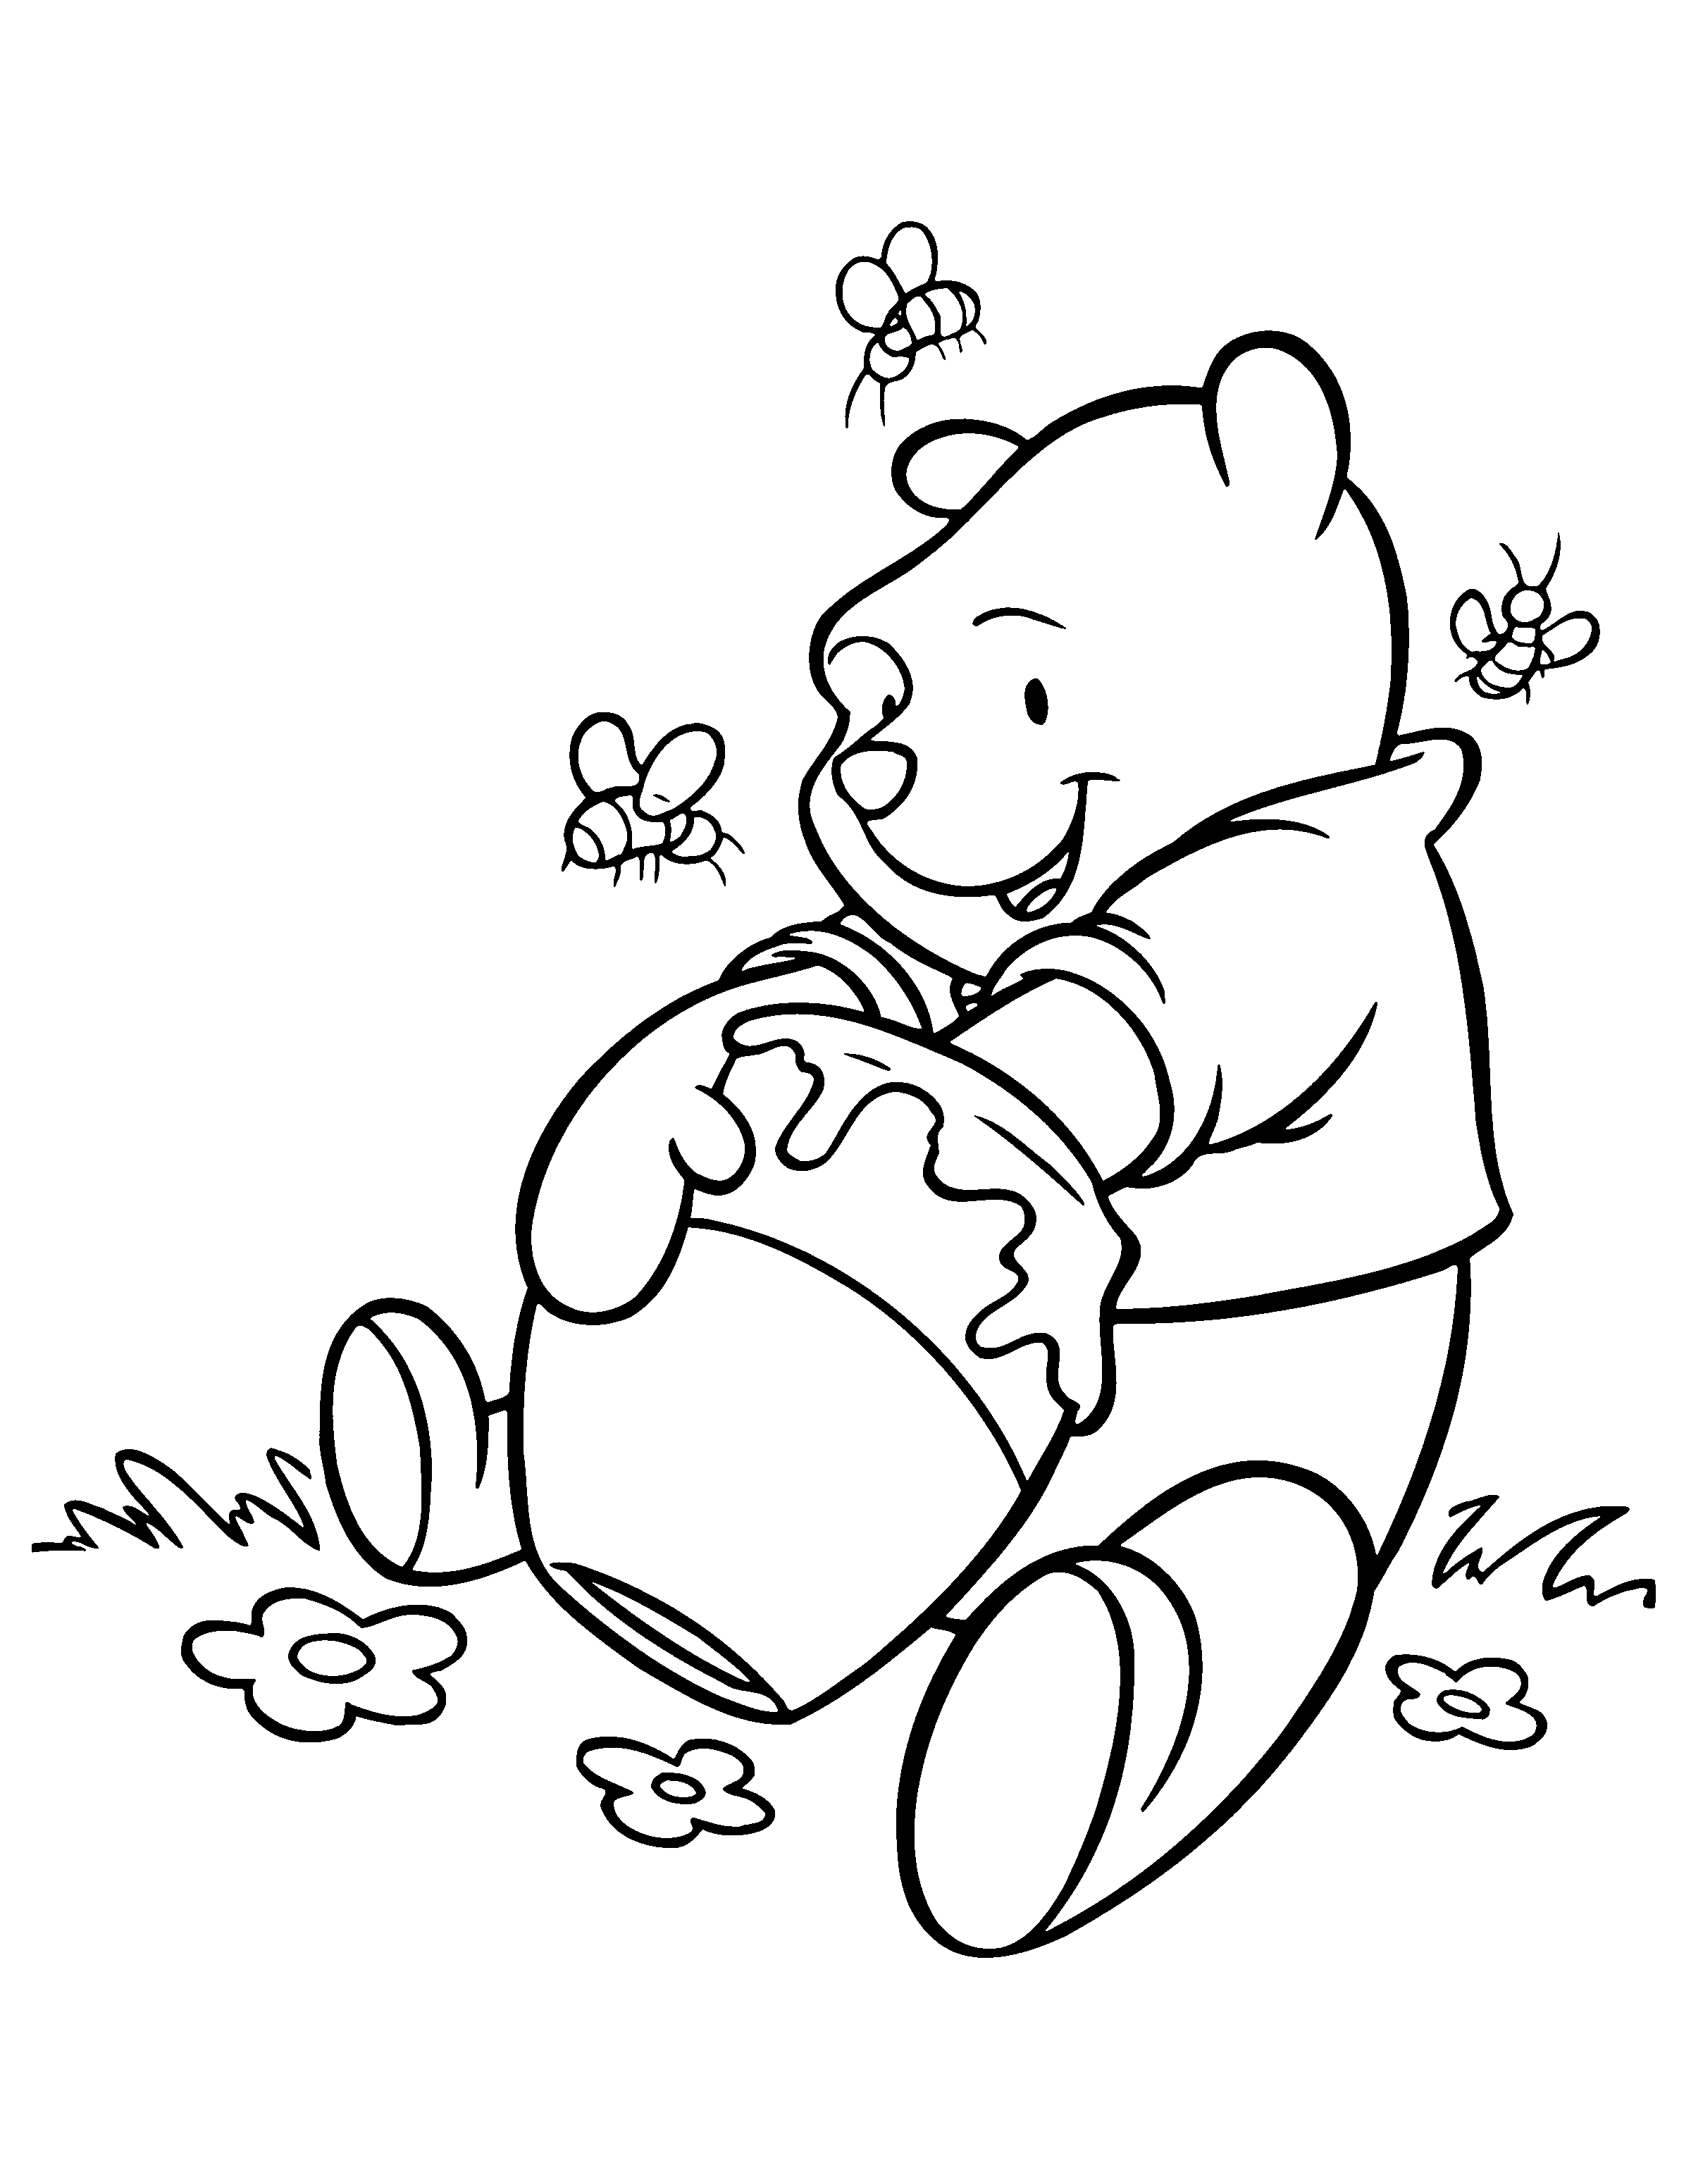 Pooh and His Honey Coloring Page